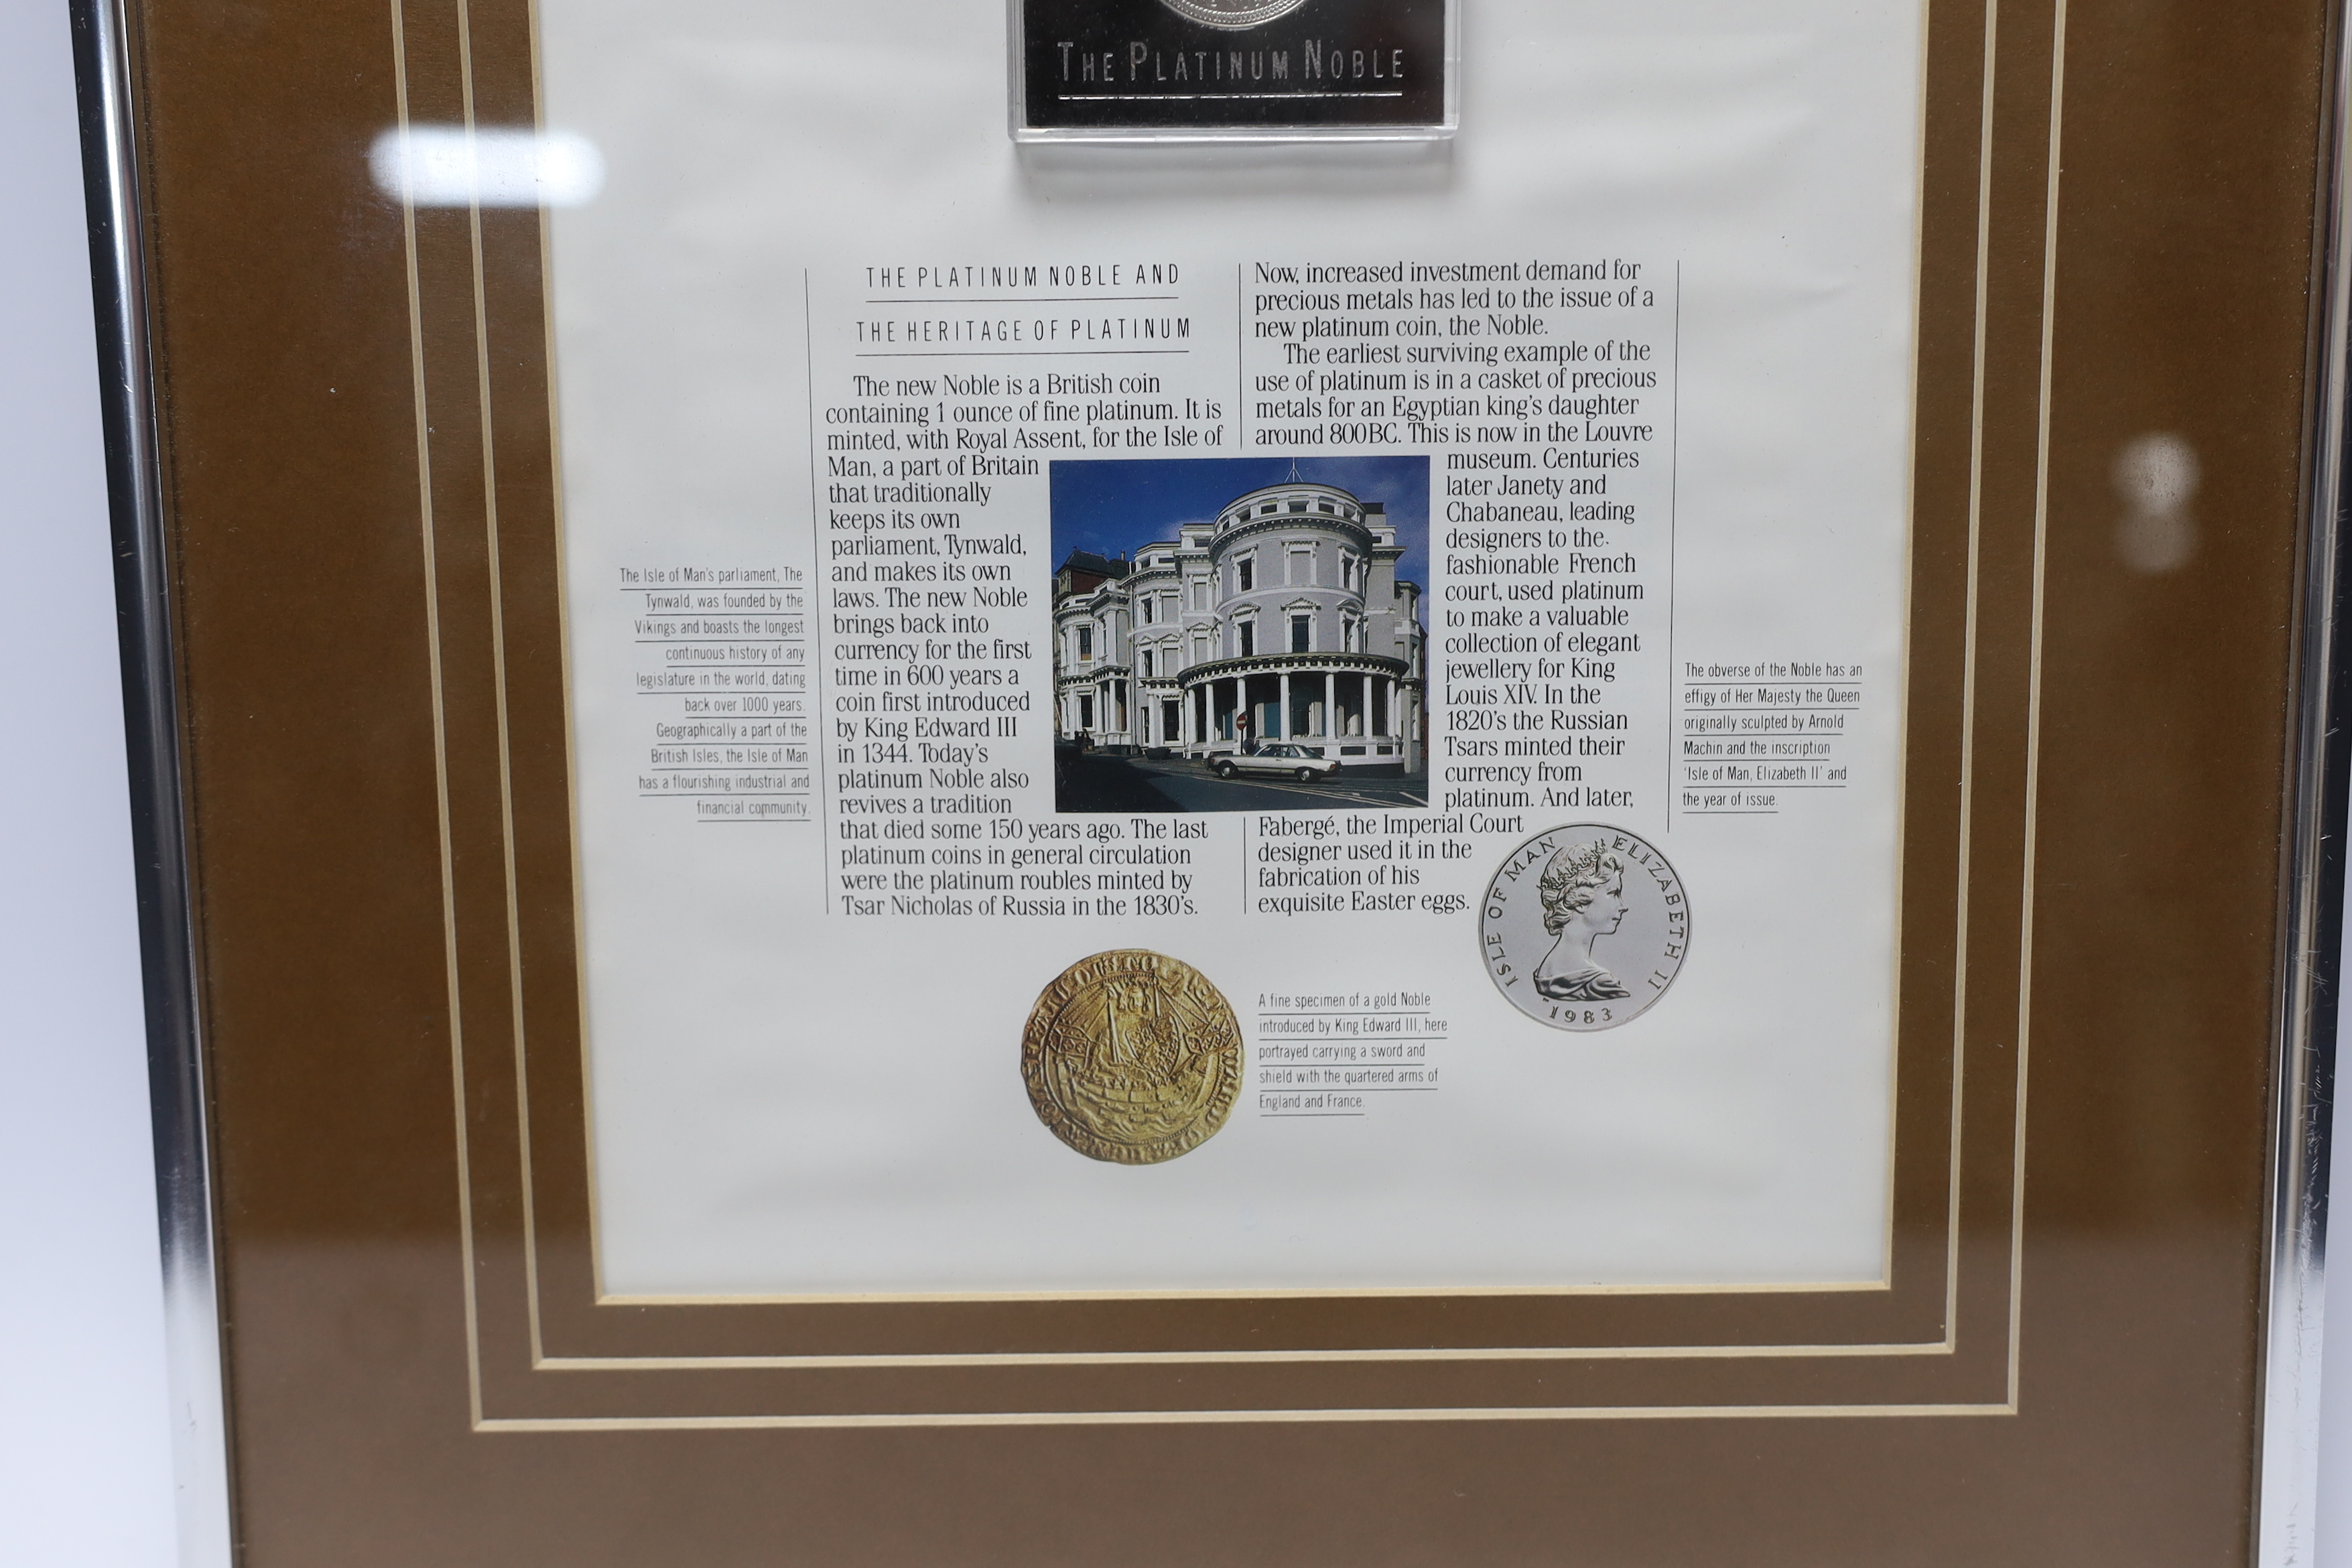 An Isle of Man 1oz. platinum one noble coin, framed display, 19.5cm x 24cm not including mount or frame